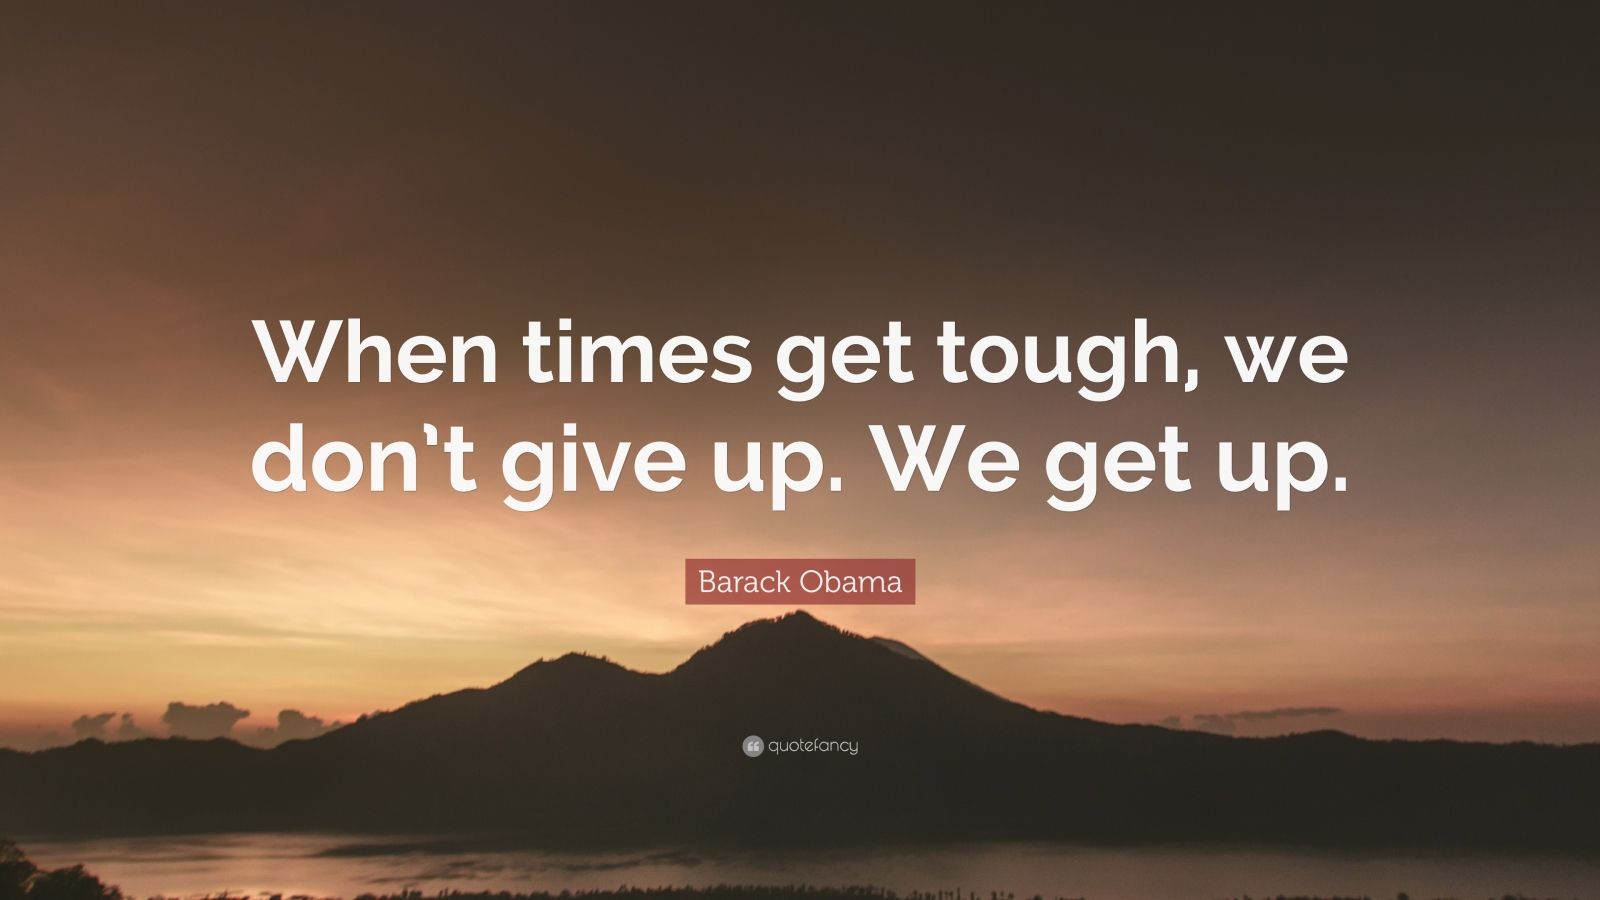 Barack Obama Quote: “When times get tough, we don’t give up. We get up